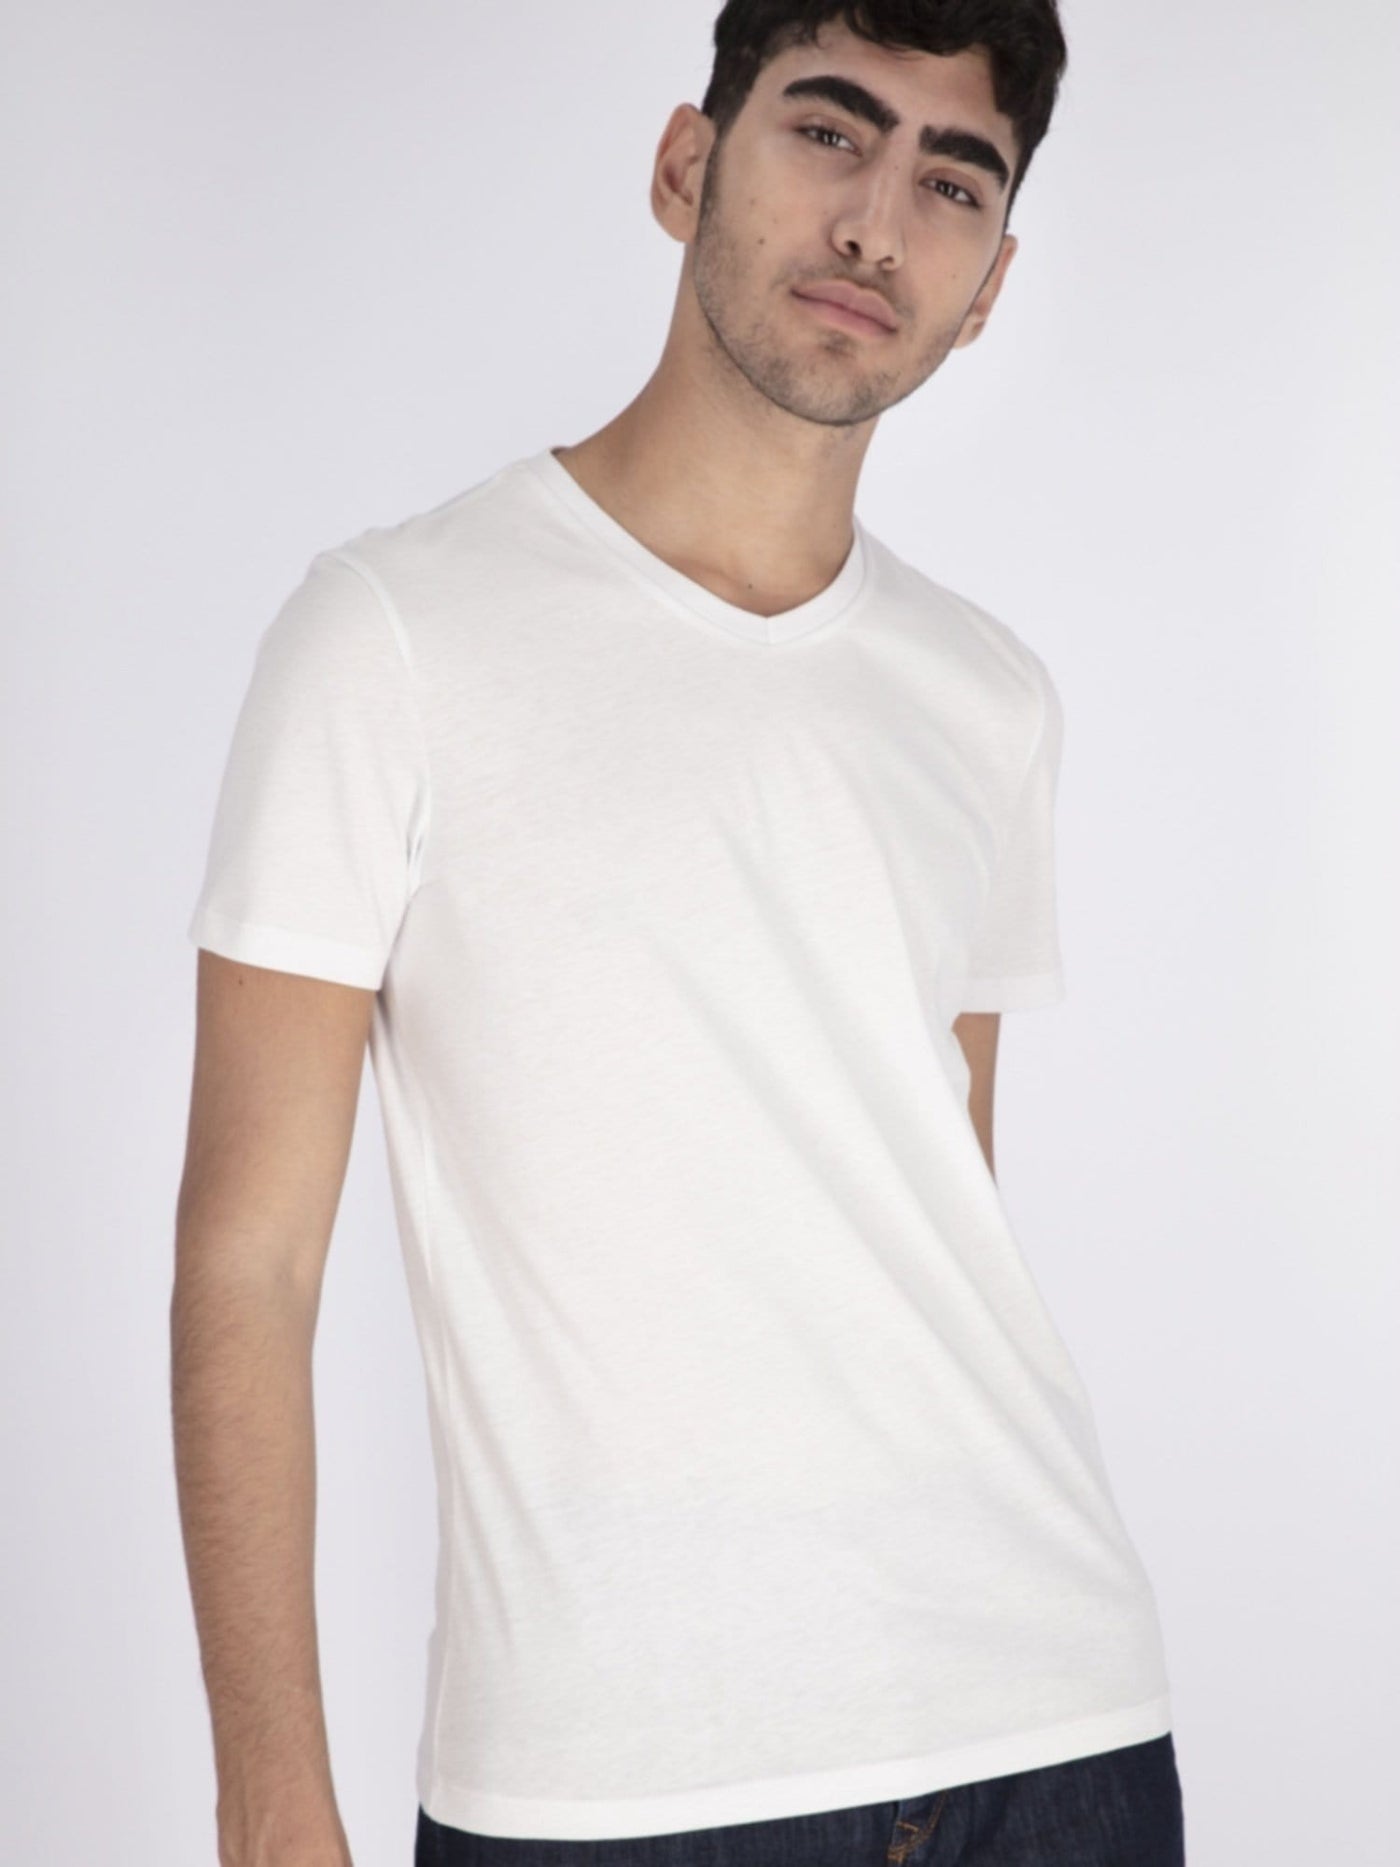 OR T-Shirts White / S Short Sleeve T-Shirt with V-Neck